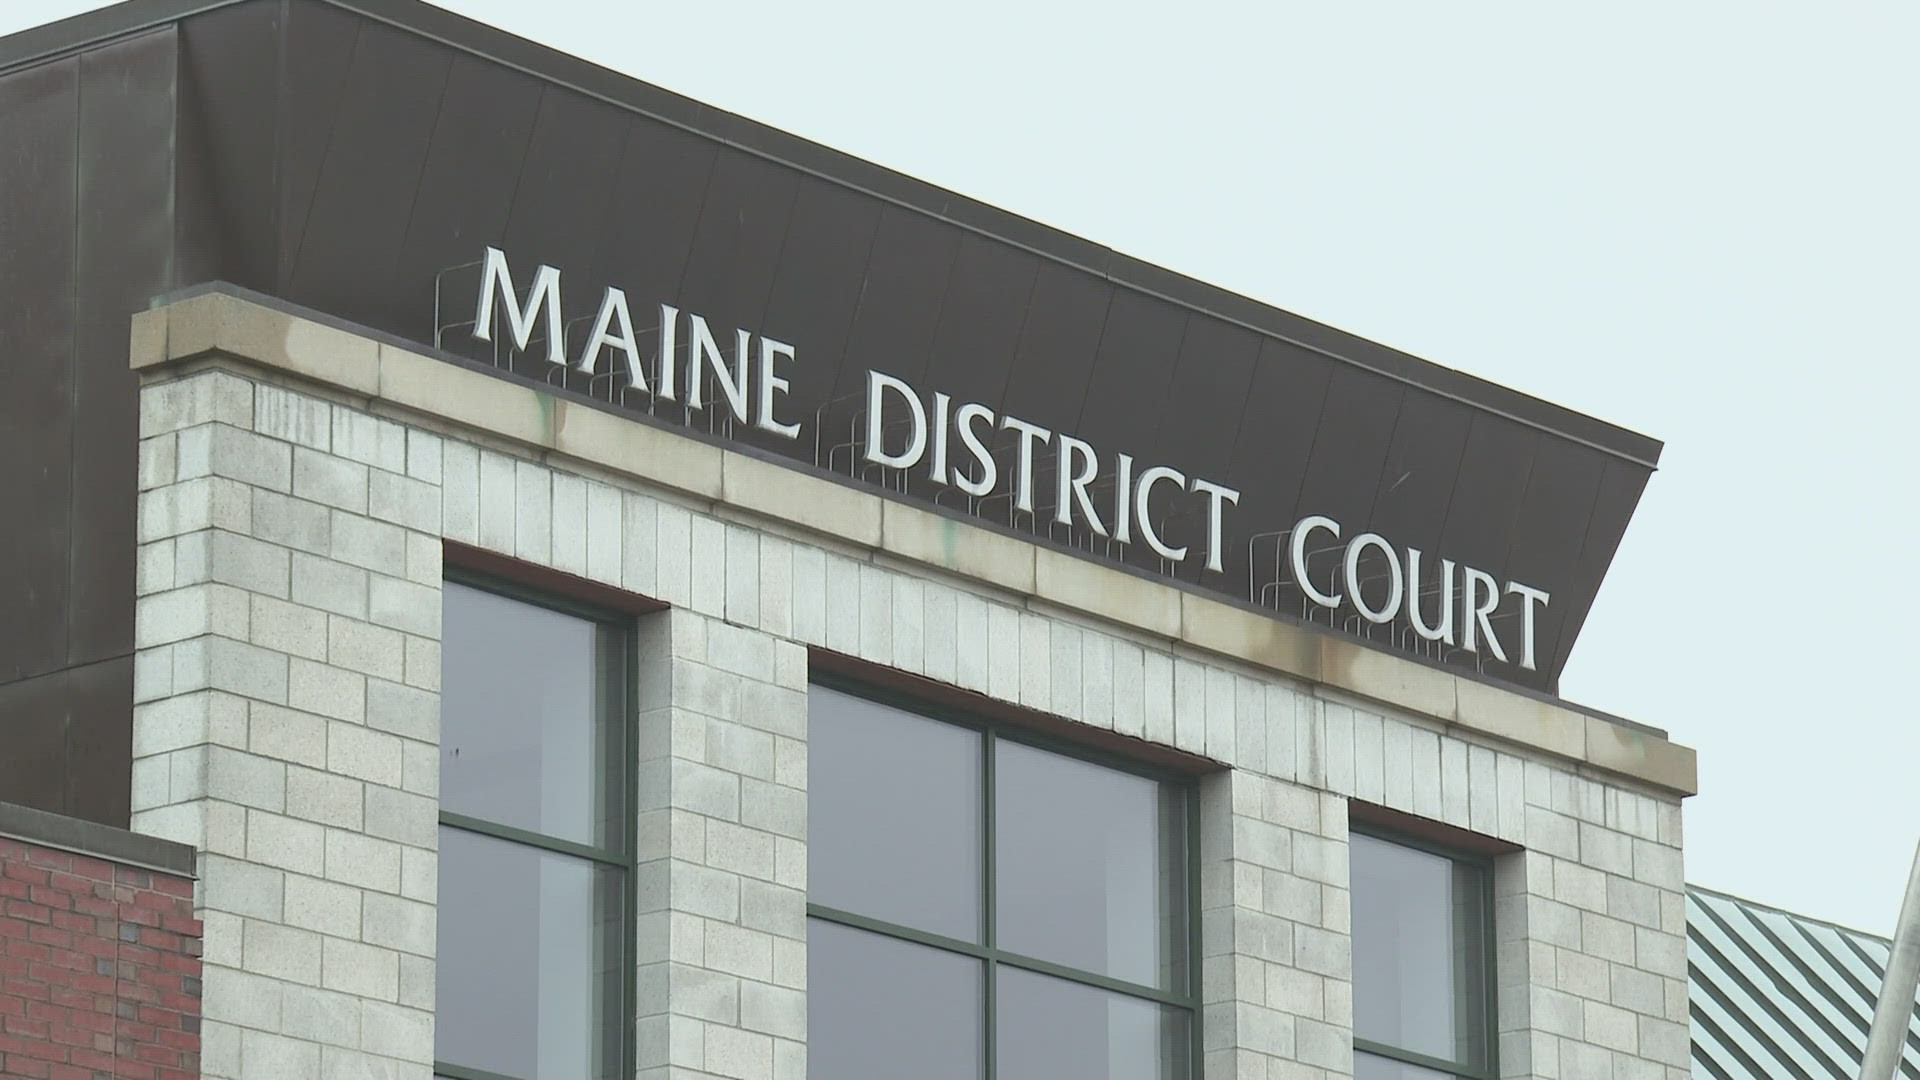 The bill would transfer three former district courthouses to Maine State Housing Authority or local housing authorities to turn them into residential housing.